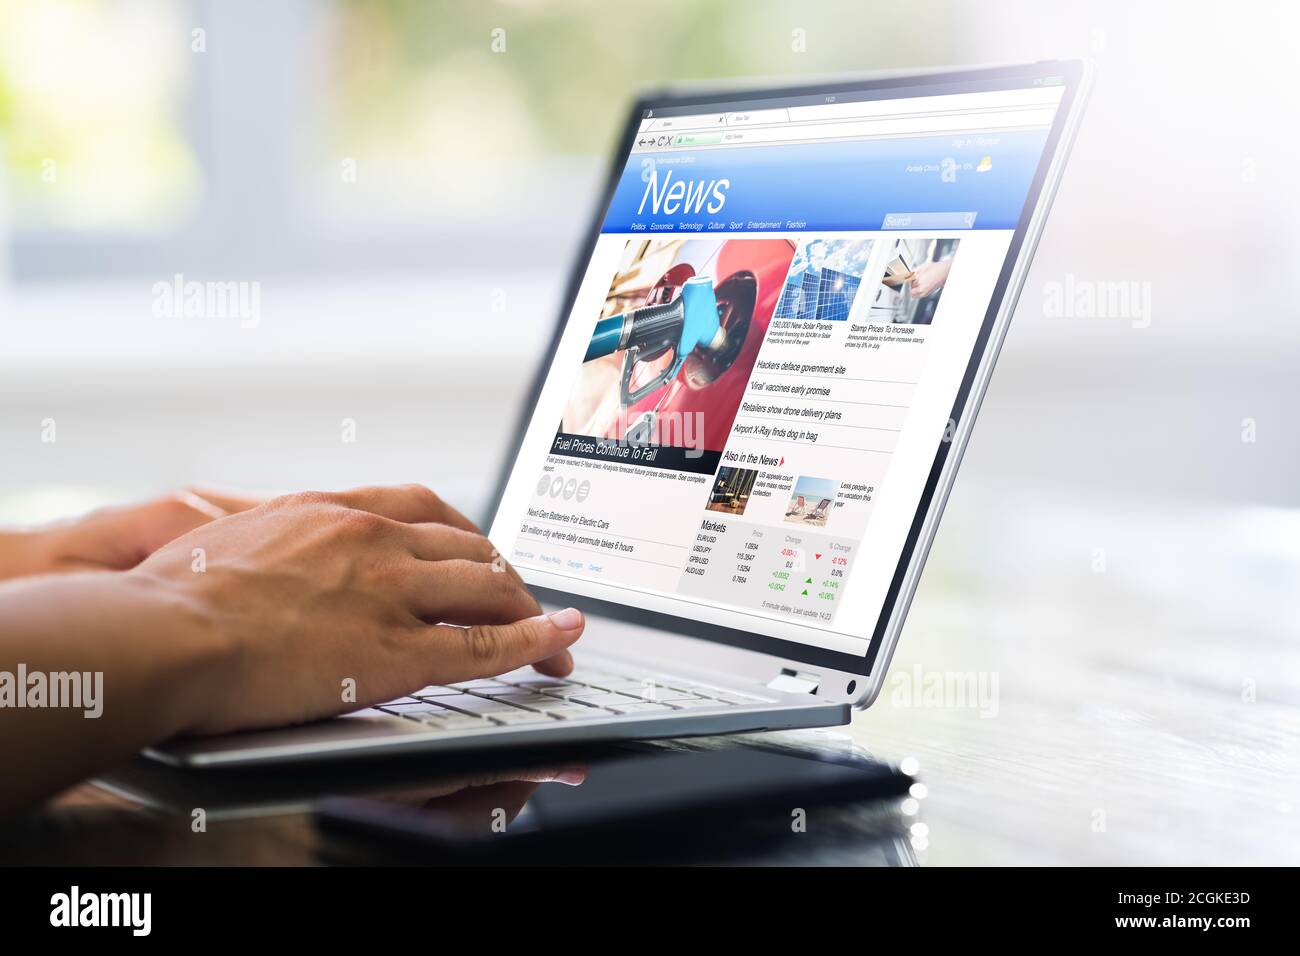 Online News Media On Computer. Electronic Newspaper Stock Photo